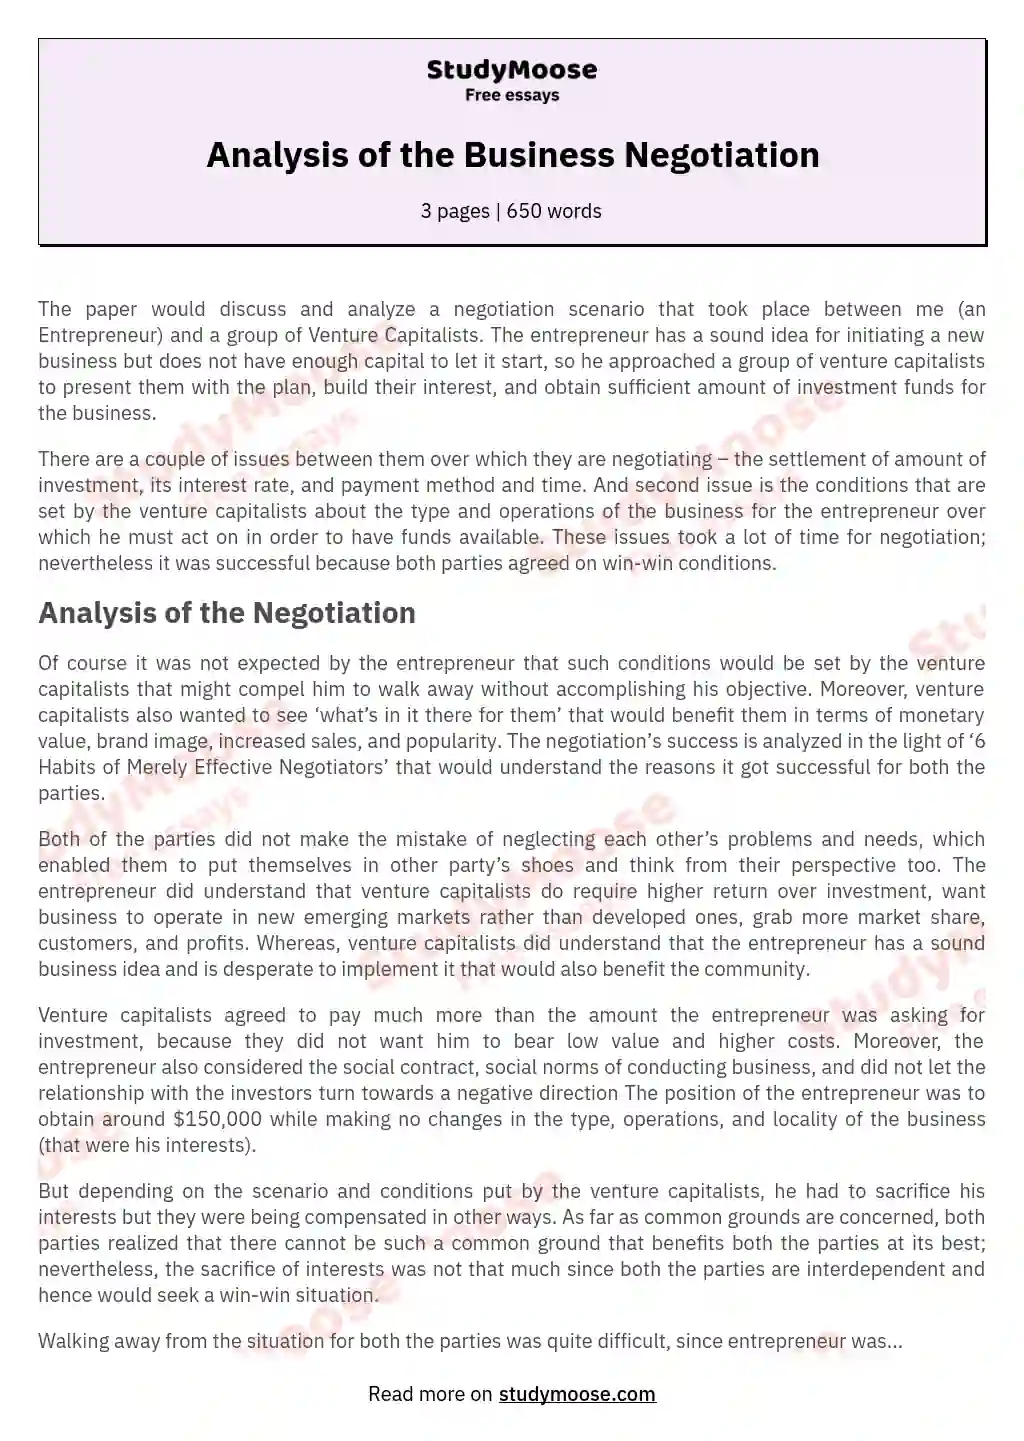 Analysis of the Business Negotiation essay